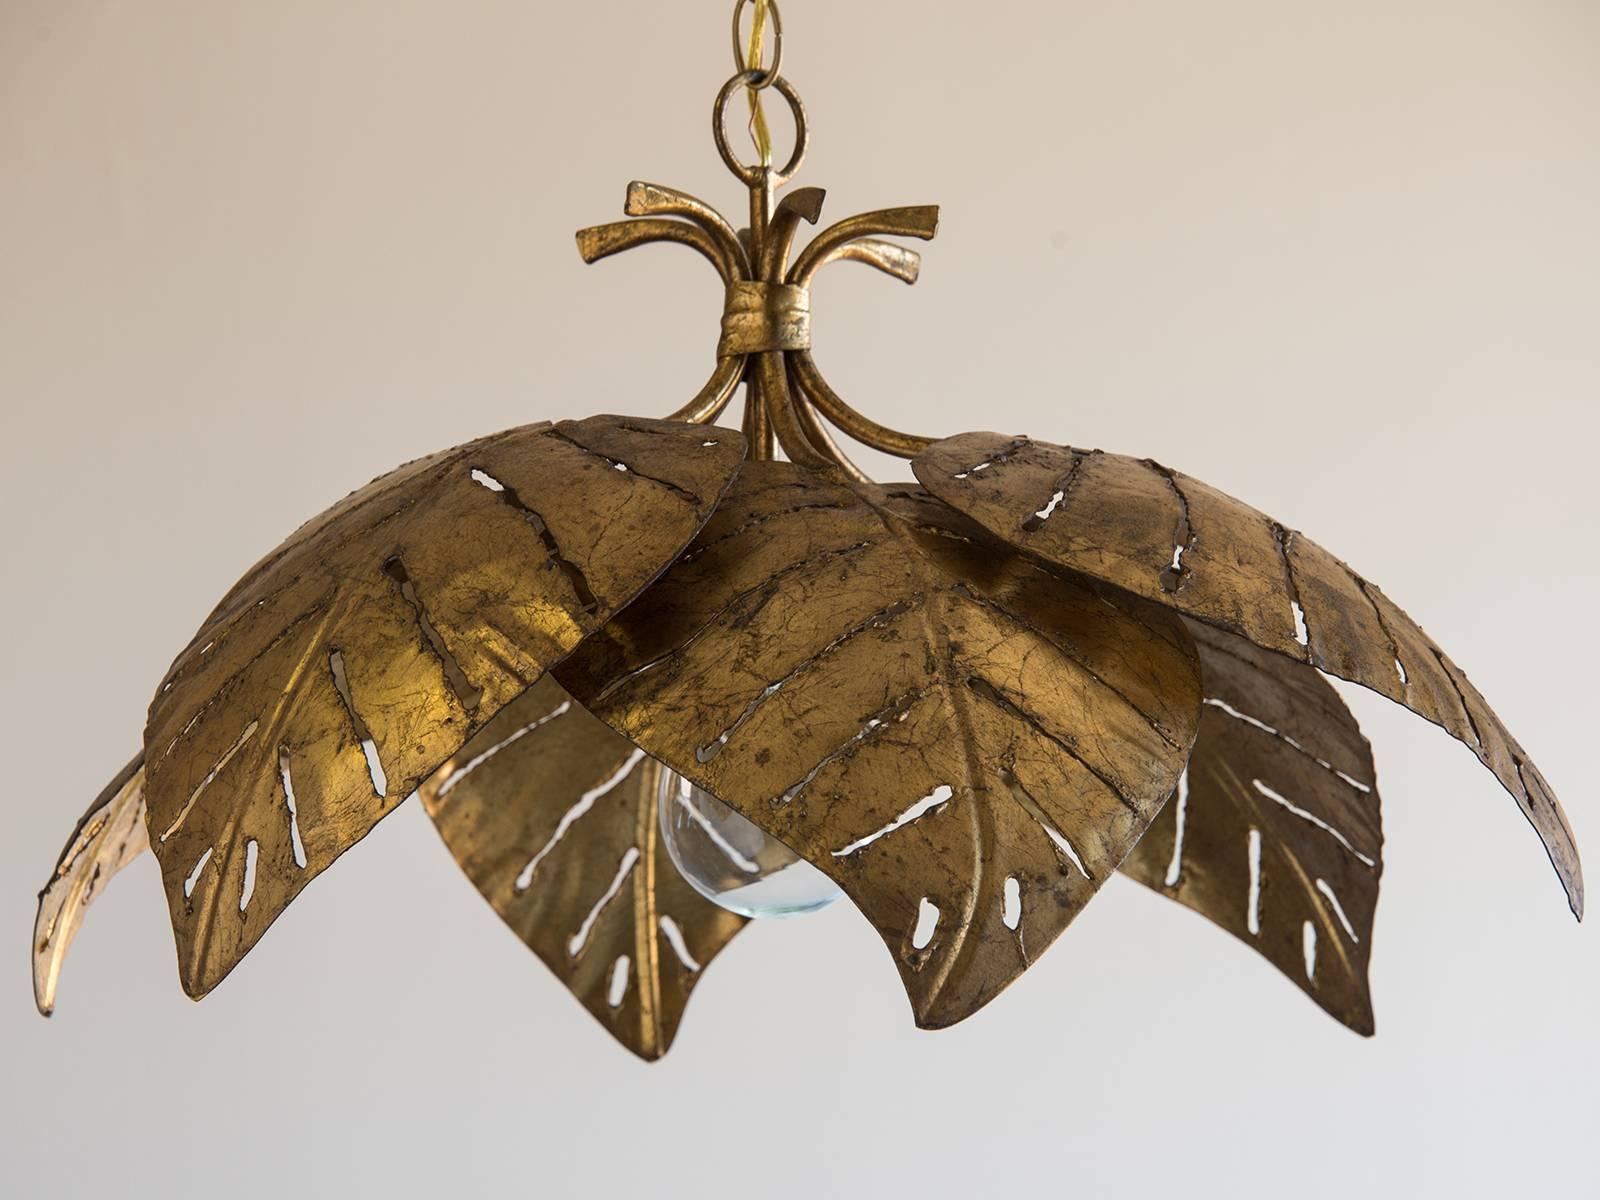 Vintage French gilded Mid-Century palm leaf chandelier, circa 1960. This circular fixture showcases six large palm leaves suspended from a chain. Please notice the handmade texture especially visible around the edge of each leaf as well as the